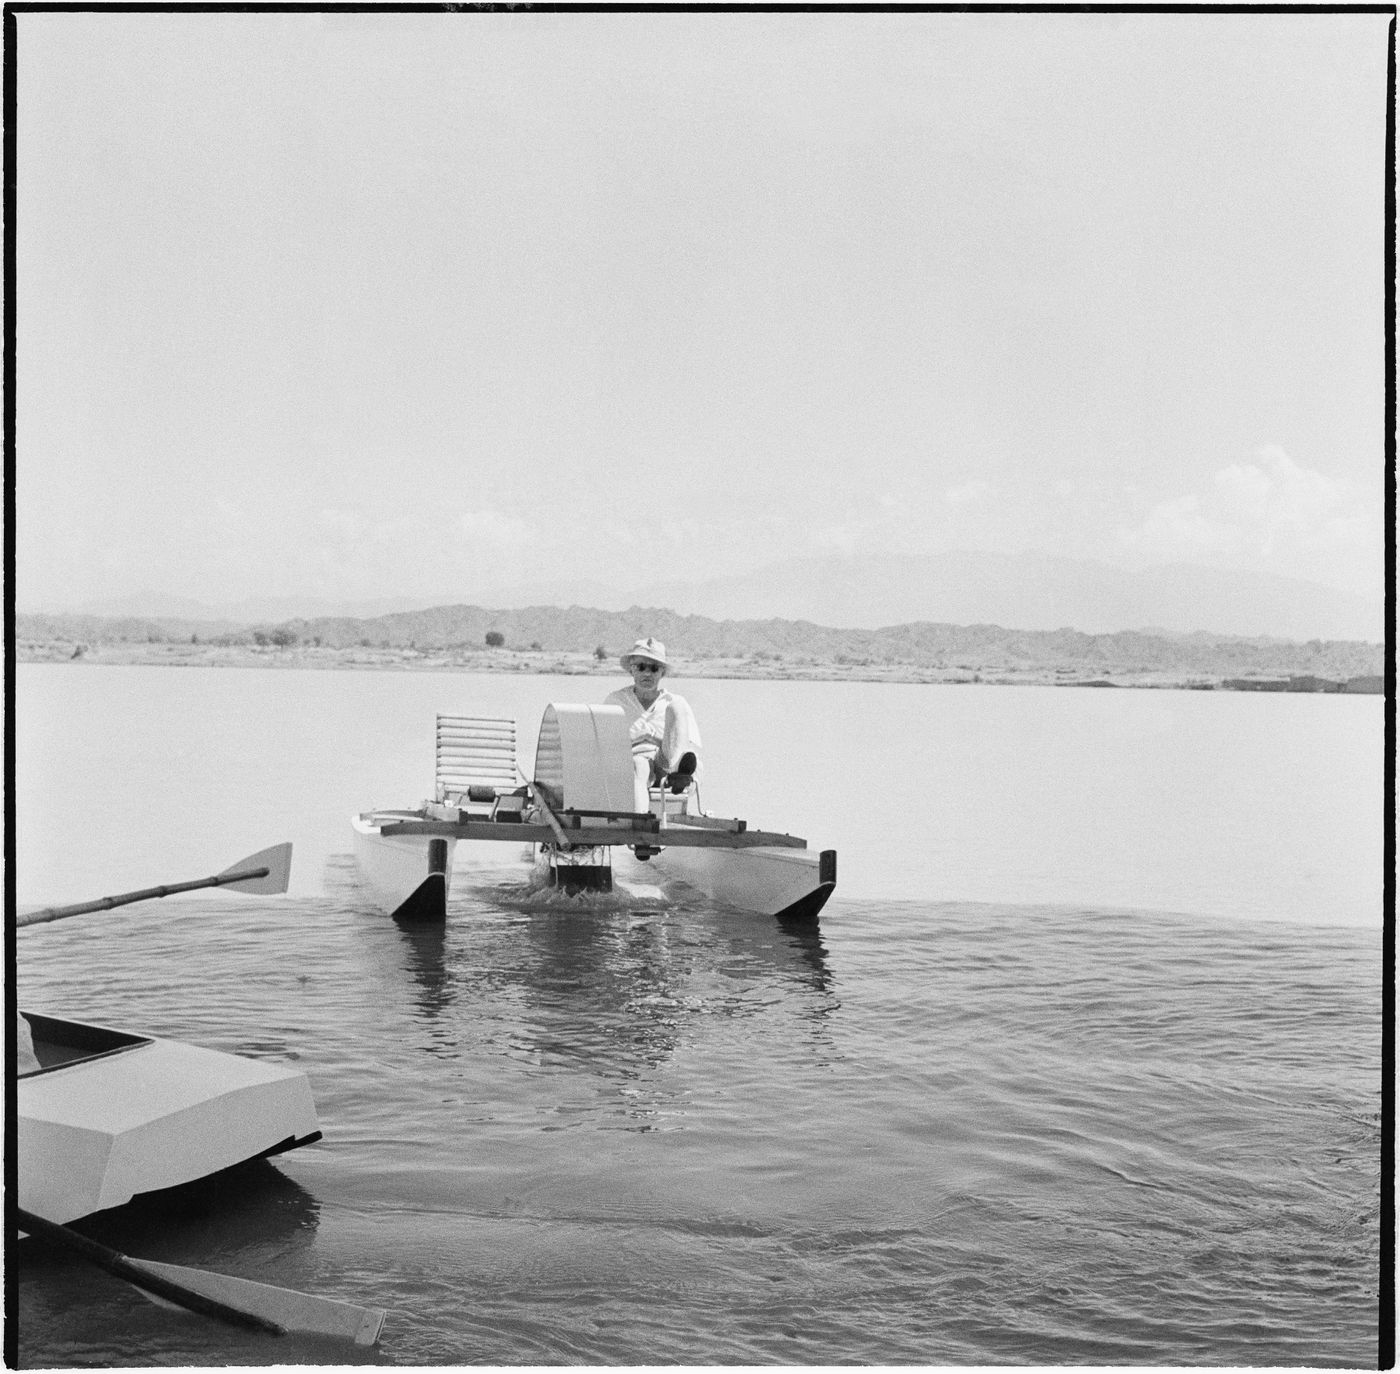 Photograph of Pierre Jeanneret on a pedal boat on the Chandigarh Lake, India